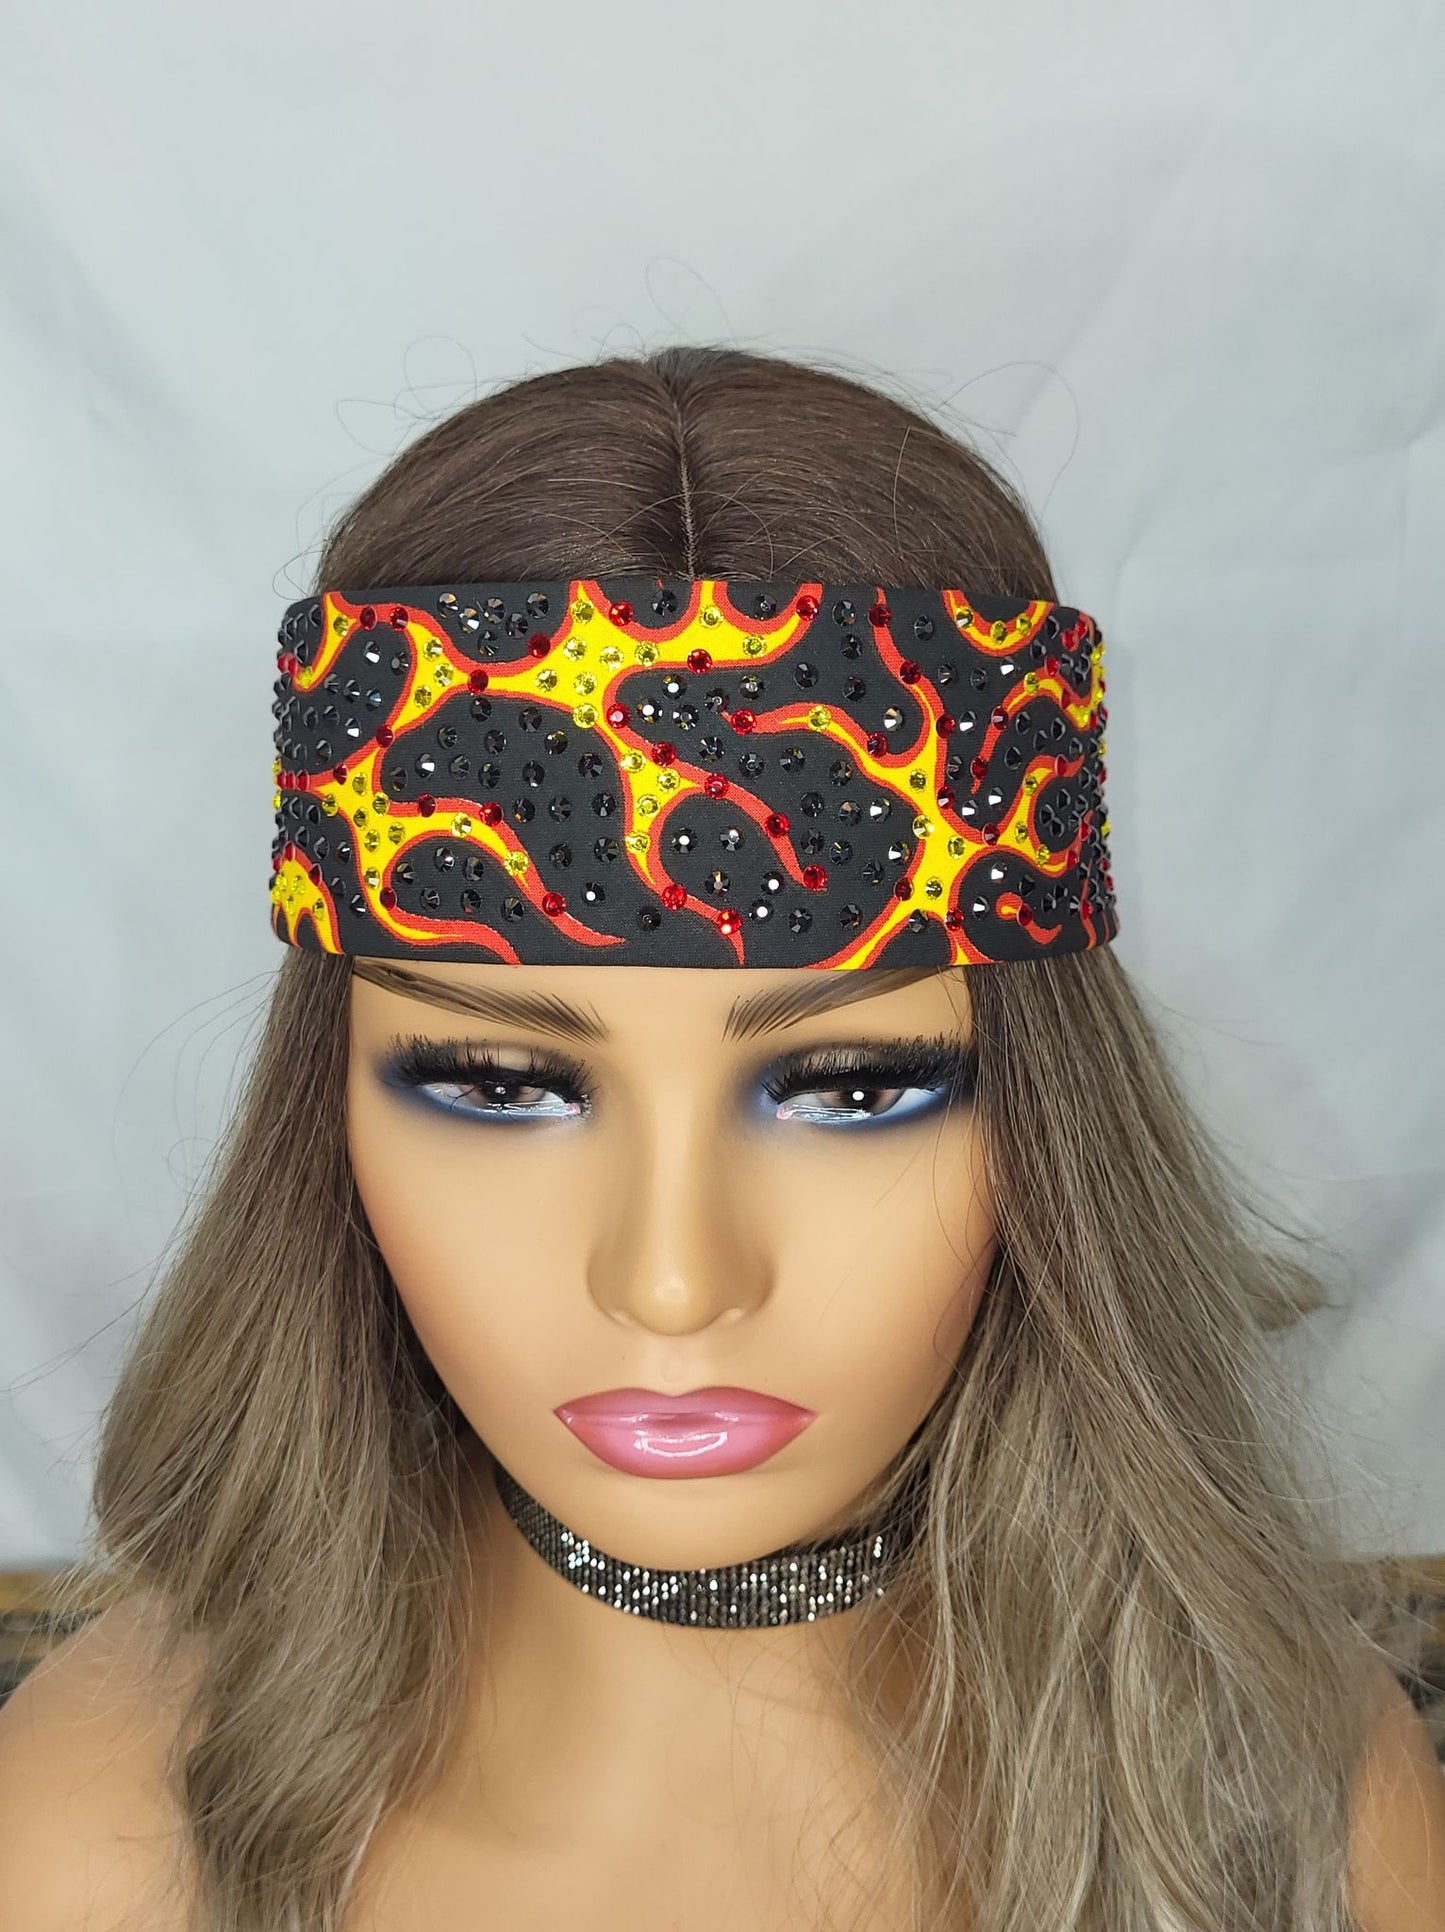 LeeAnnette Narrow Flames with Black, Red and Yellow Austrian Crystals (4992)